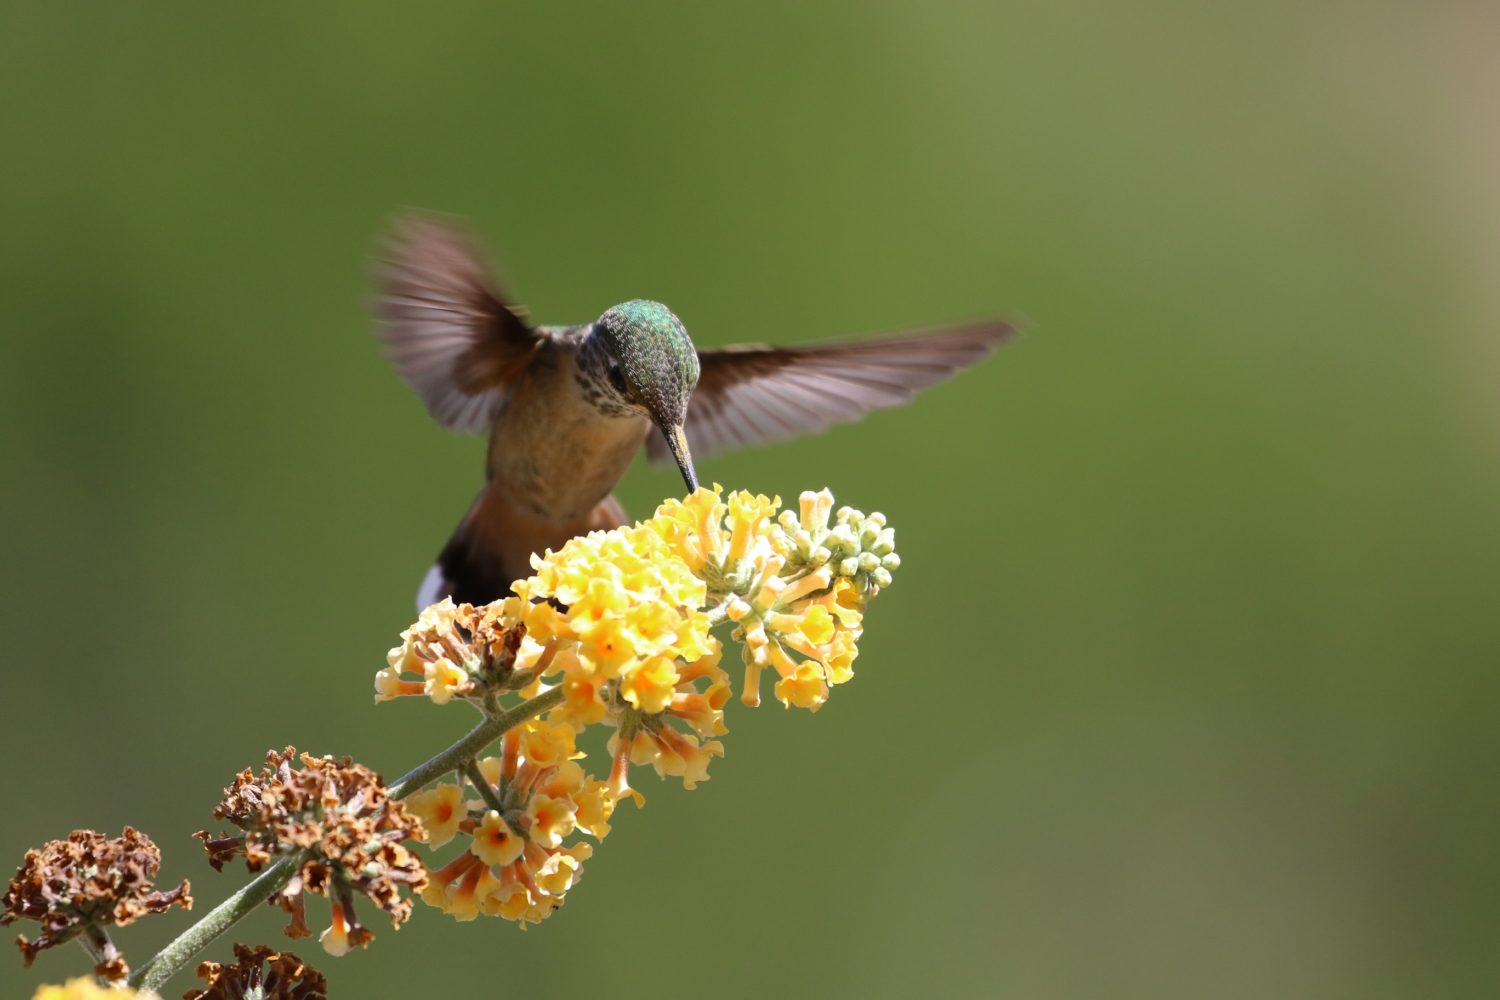 hummingbird hovering over a flower